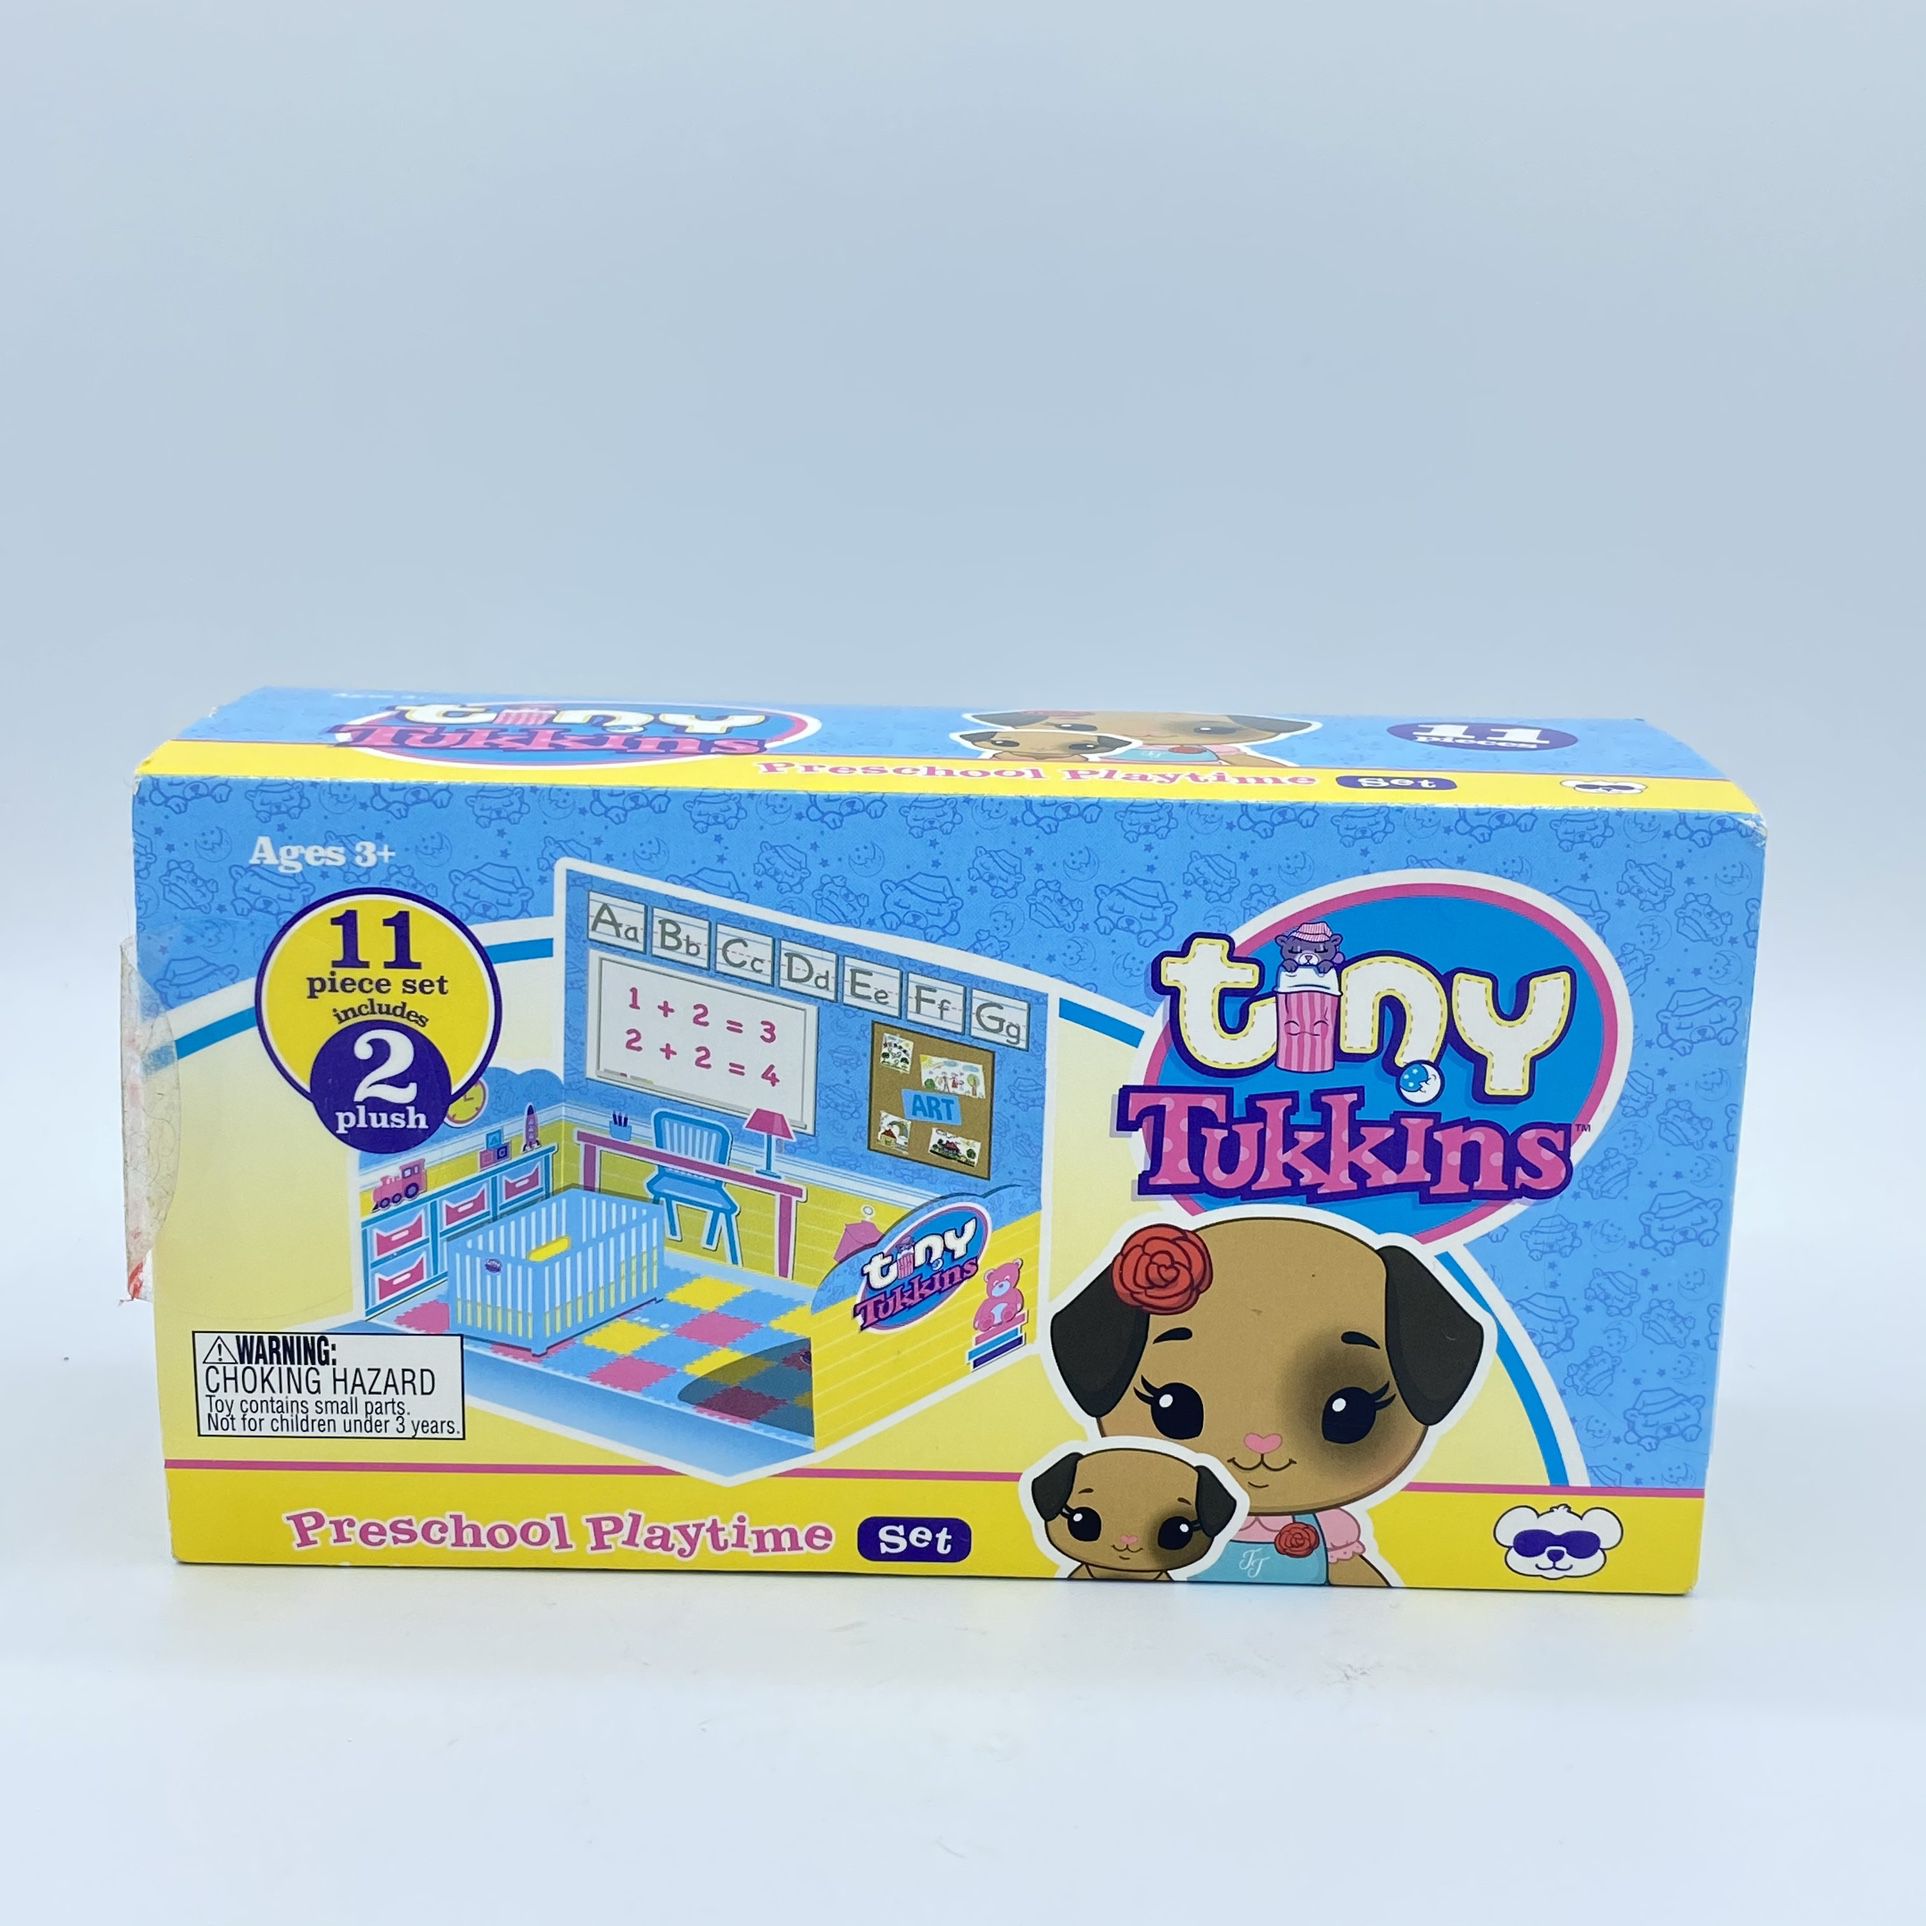 Tiny Tukkins Playset Assortment with Plush Stuffed Character Dog with Patch New